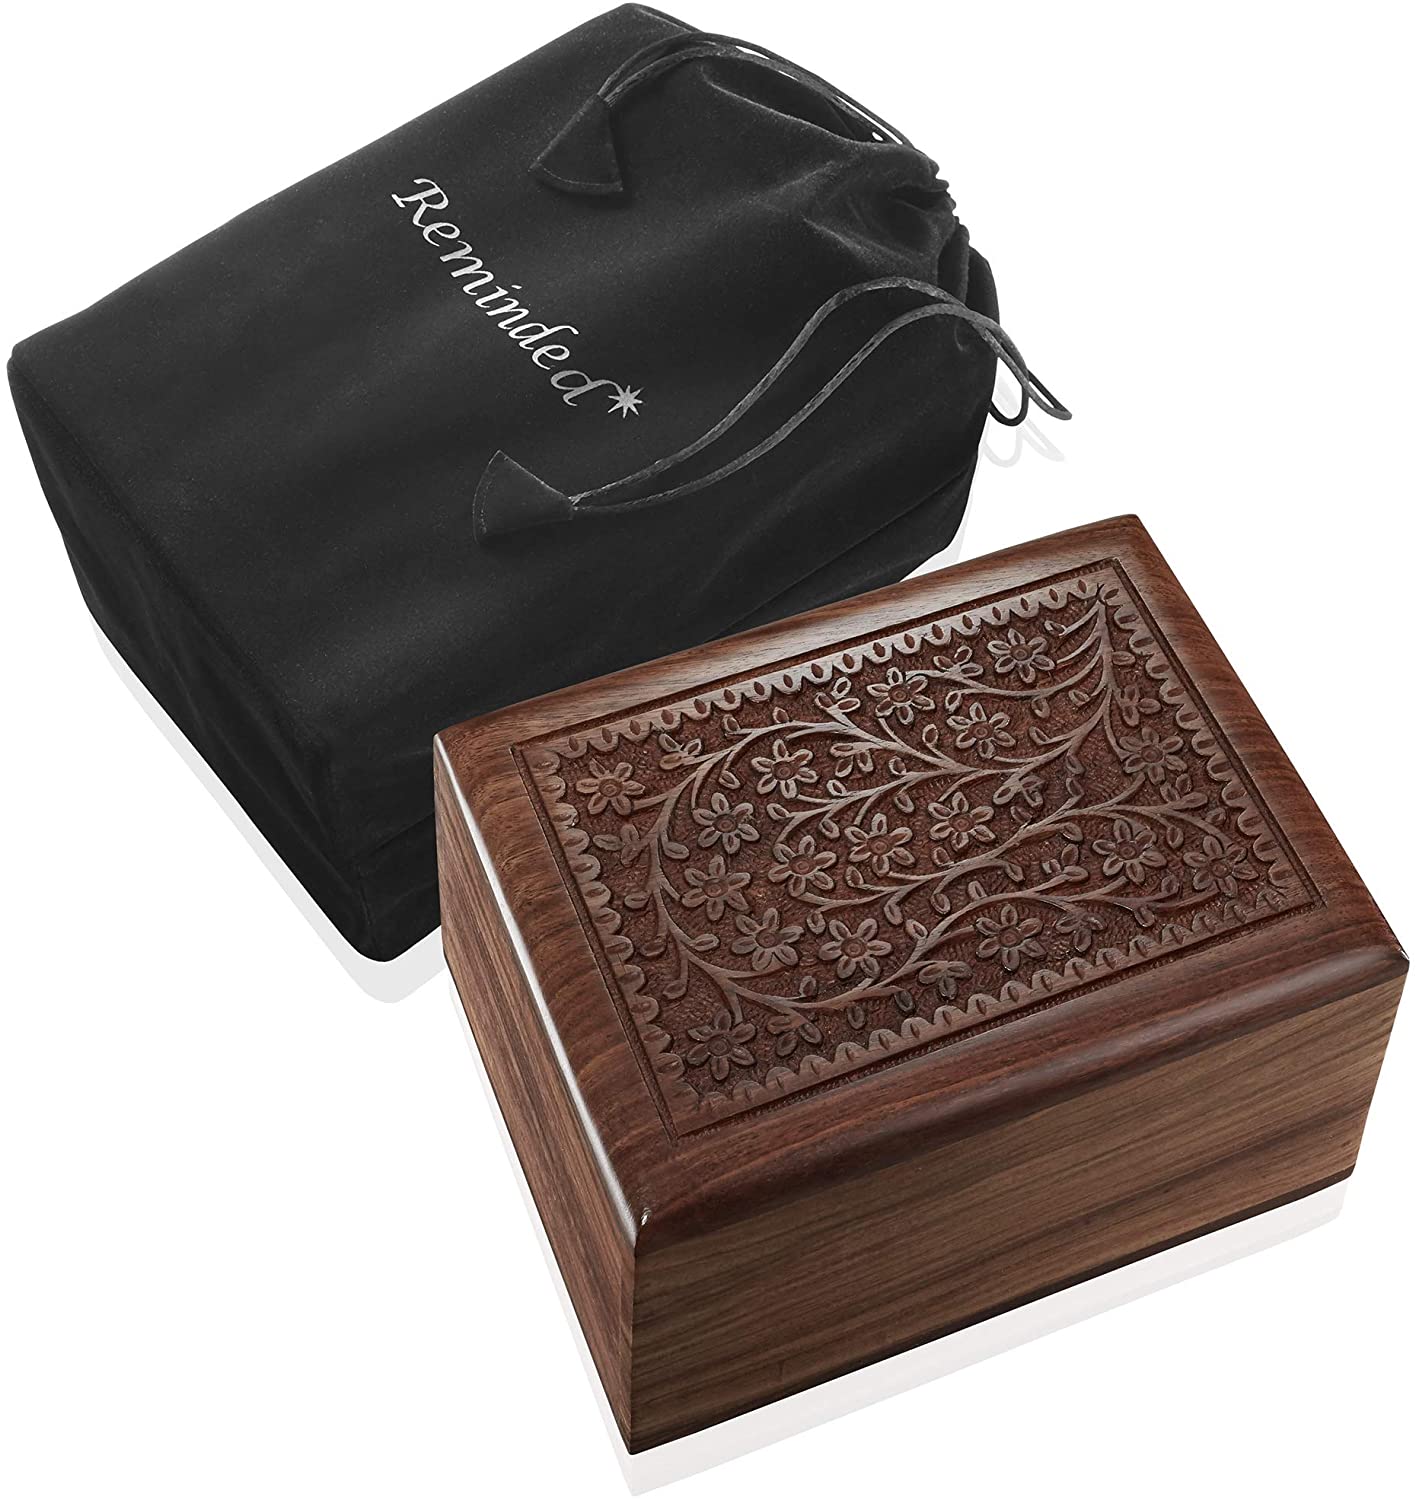 3. Reminded Rosewood Hand-Carved Floral Urn Box